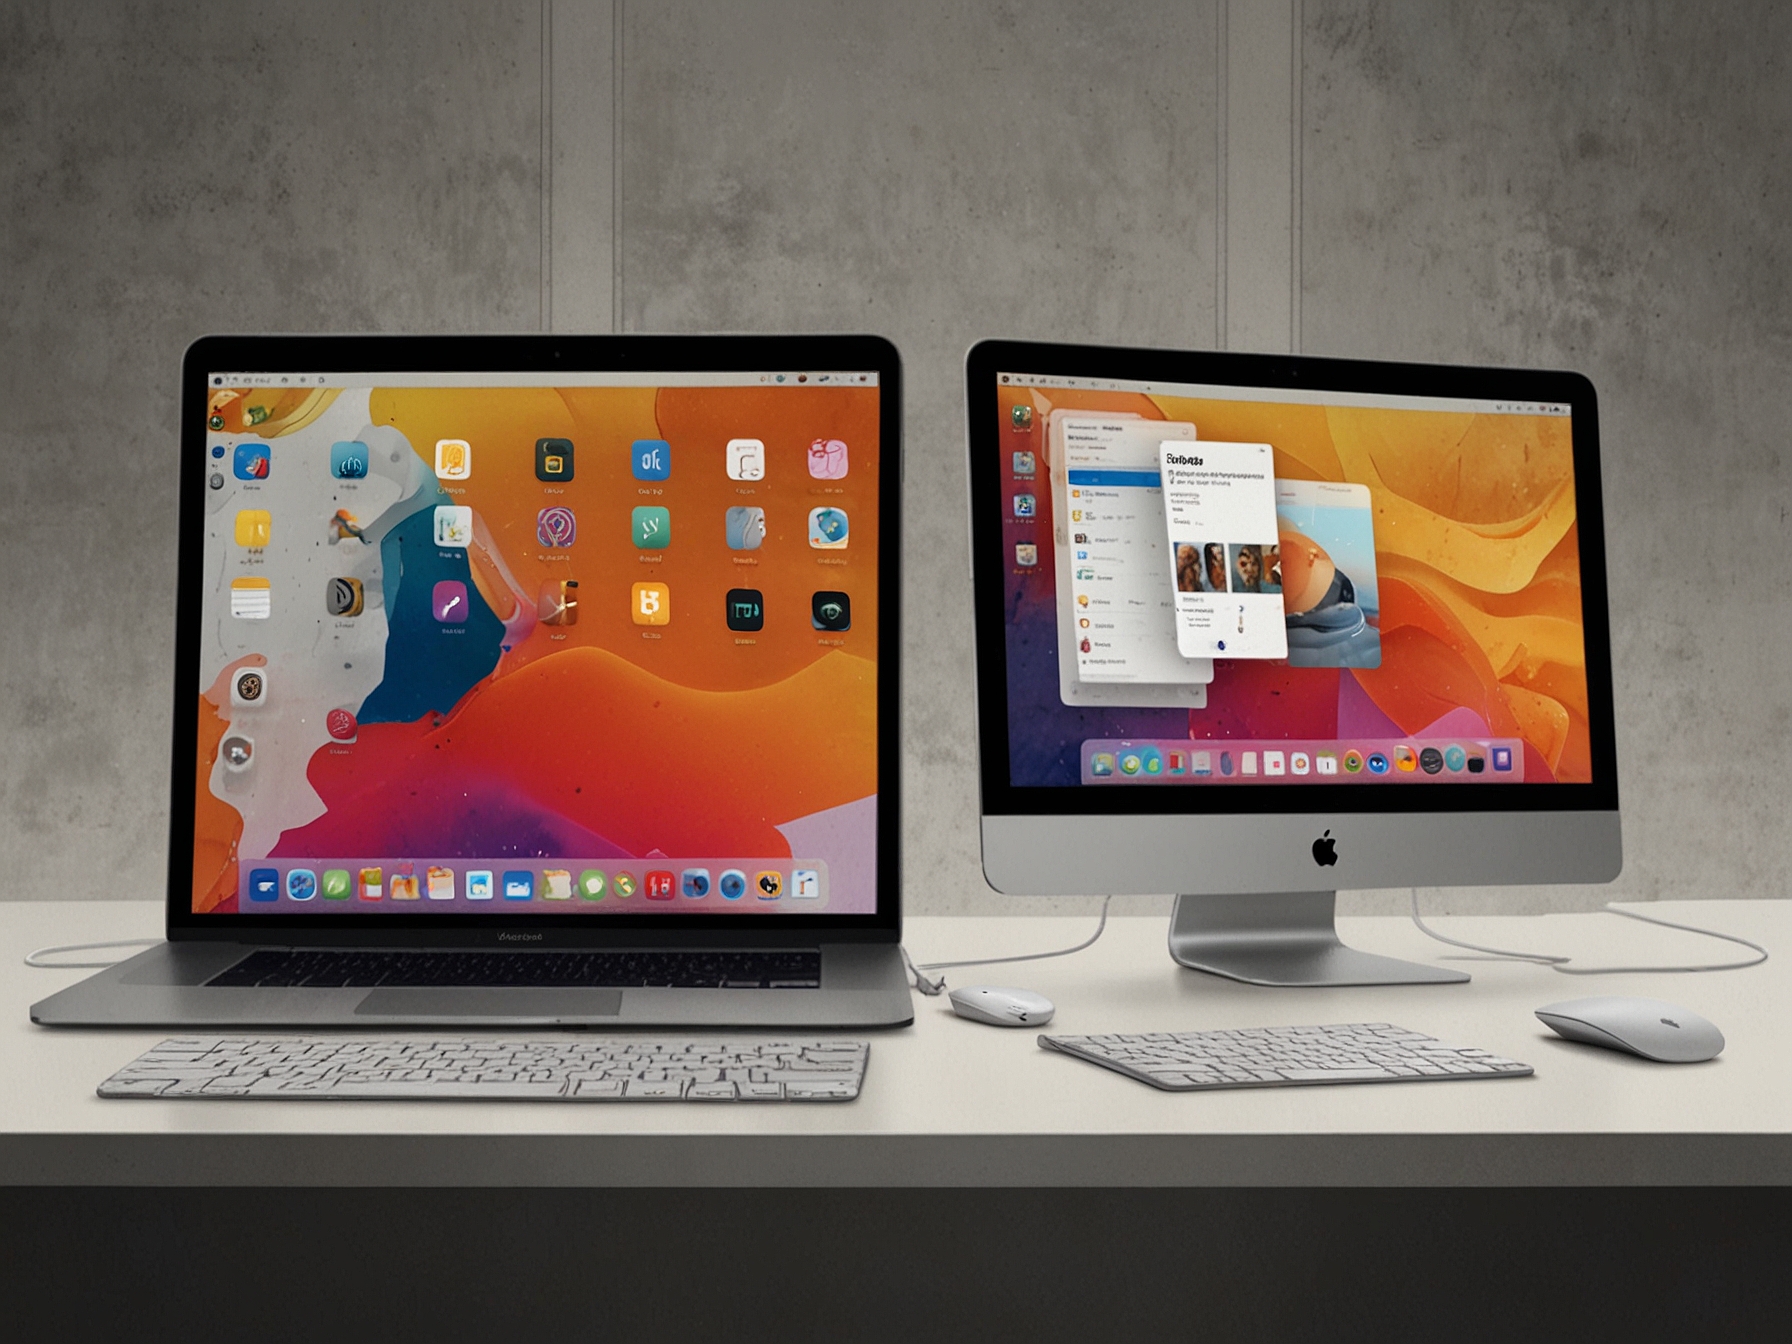 A conceptual image showing Apple devices like iPhone, MacBook, and iPad seamlessly integrating with Apple Intelligence+, demonstrating advanced AI functionalities and user personalization.